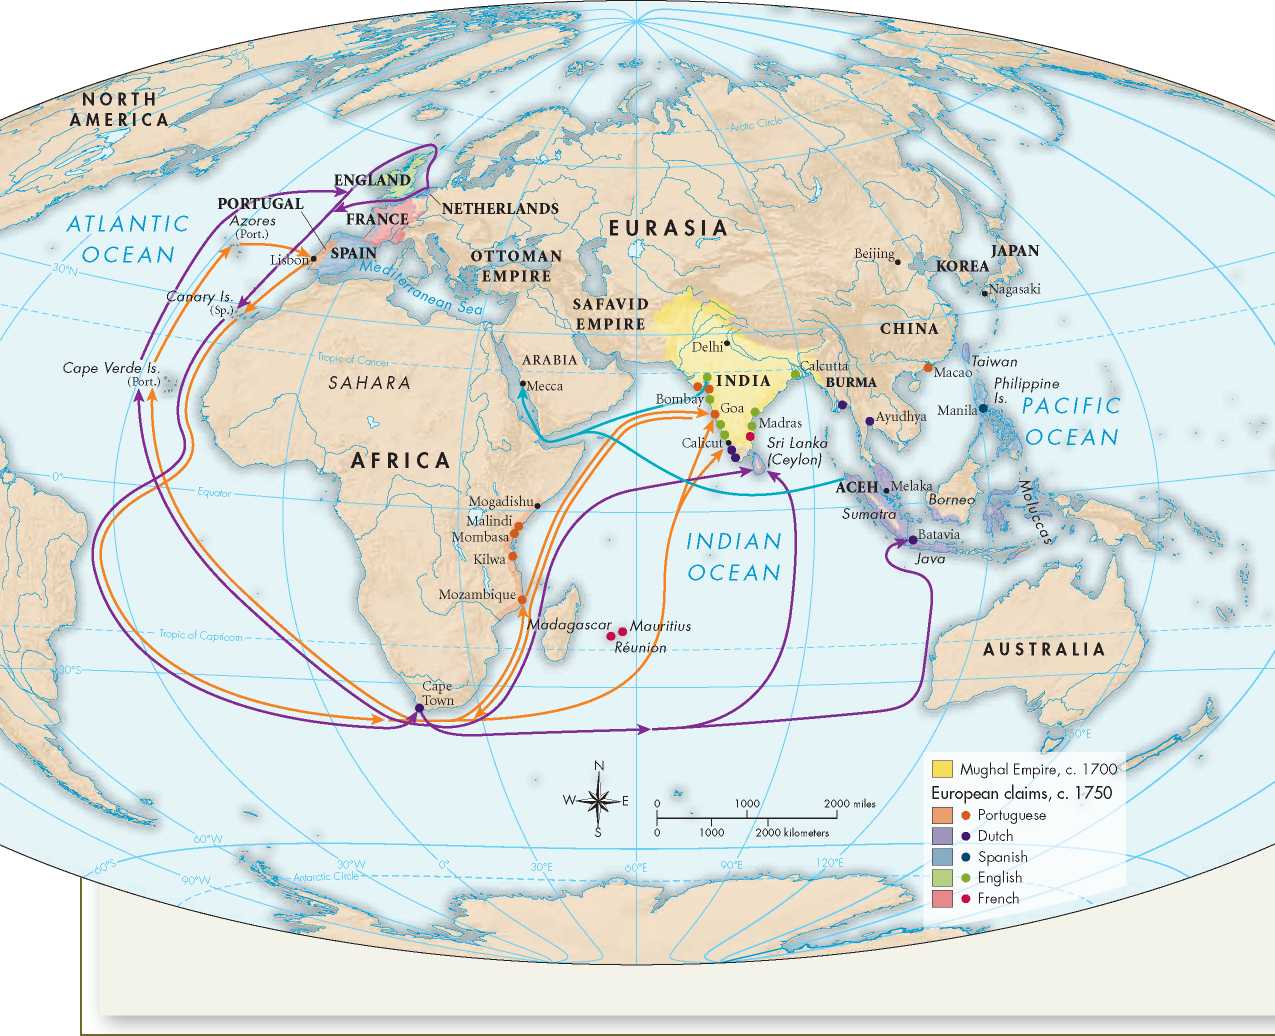 Indian Ocean trade Route. European World Empires 1700 ships. Indian Ocean shipping Routes Development. Modern period (1750–1980s) of globalisation. Индийский океан путешественники